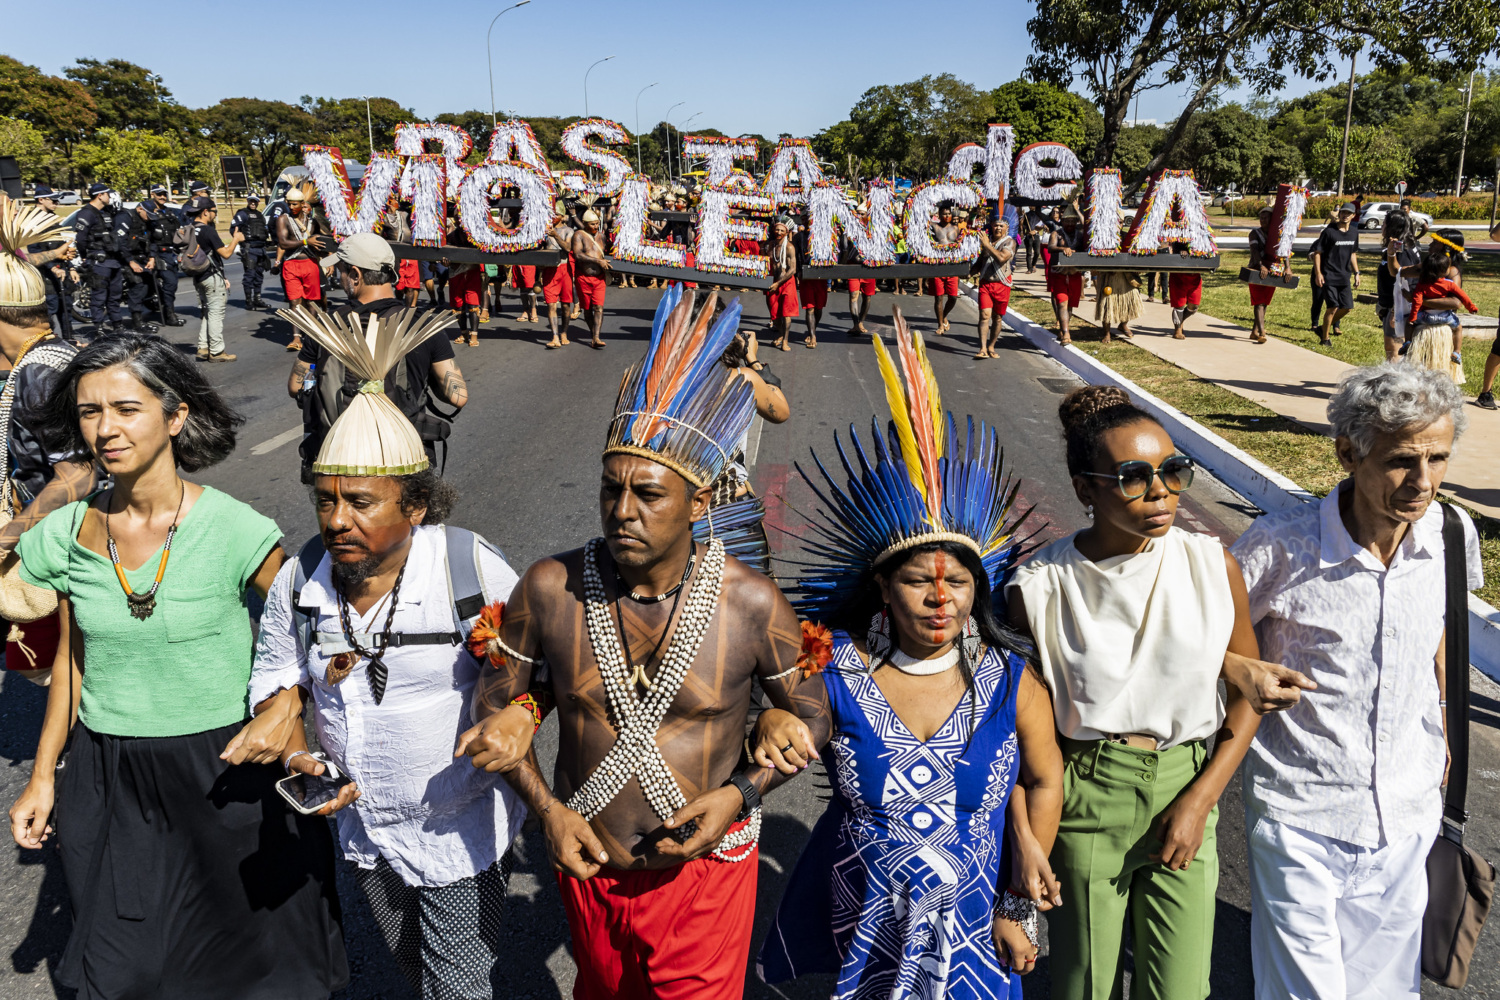 A group of Indigenous Brazilian people marching.